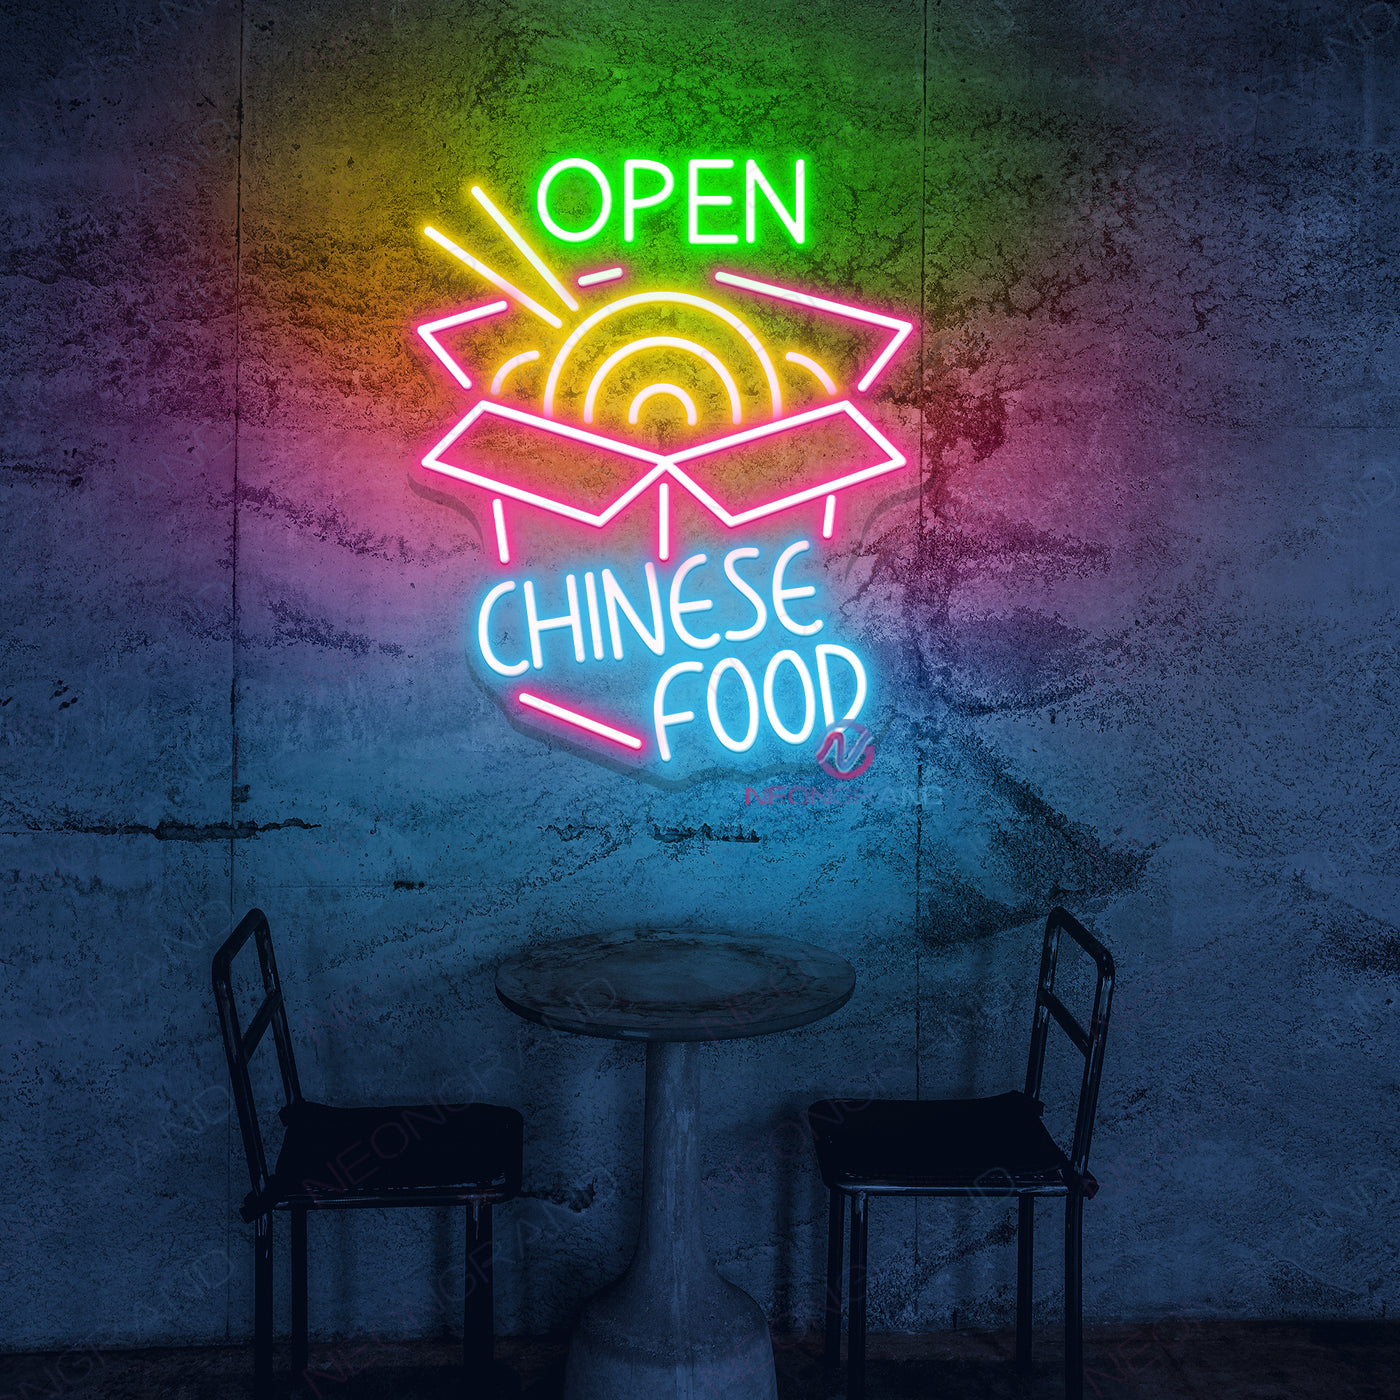 Chinese Food Open Neon Sign Kitchen Led Light